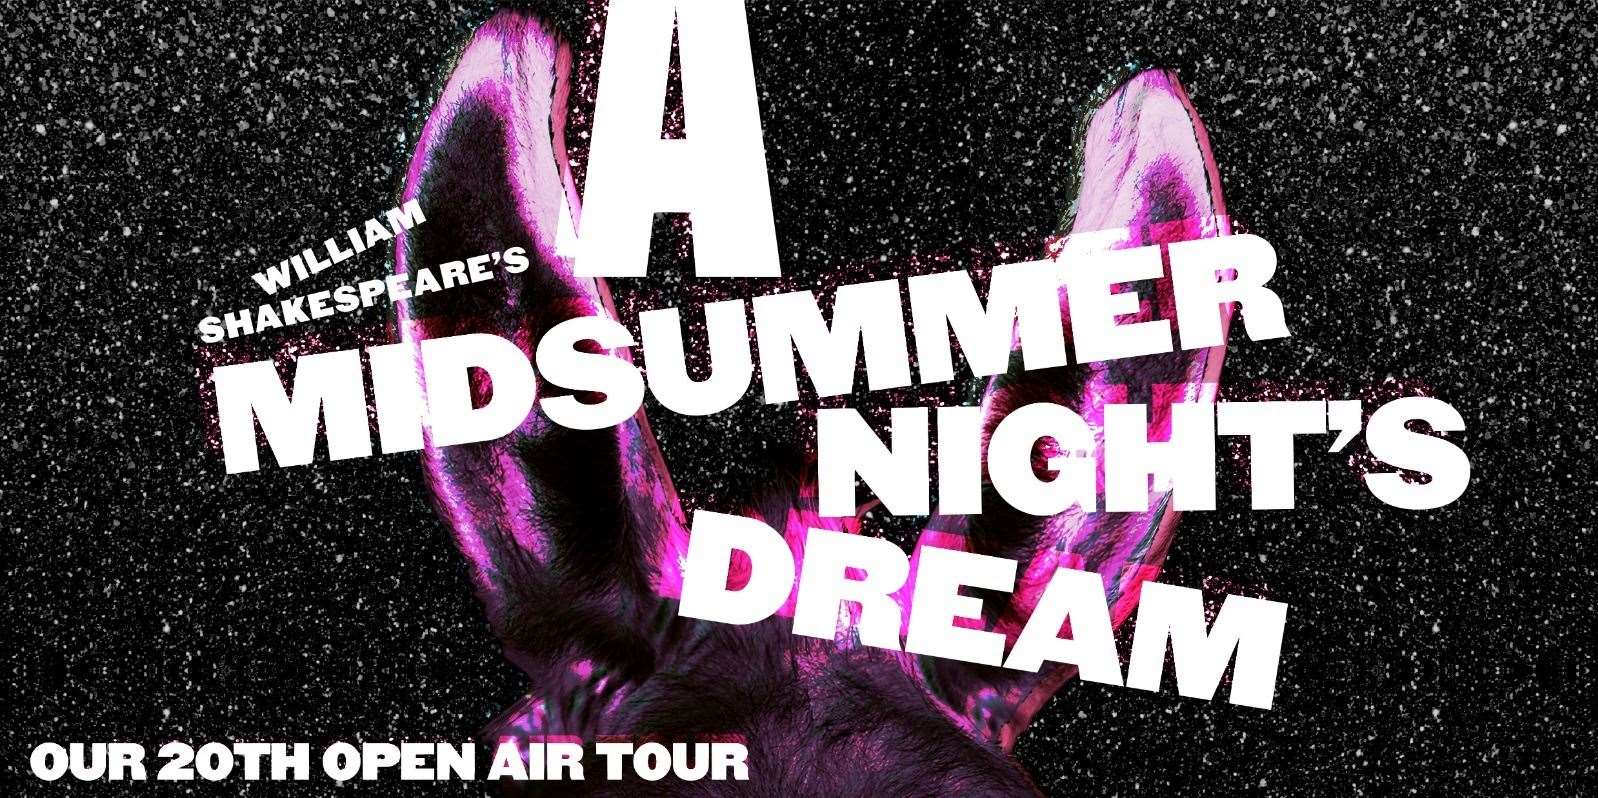 A Midsummer Night's Dream by Changeling Theatre will be the 20th outdoor tour